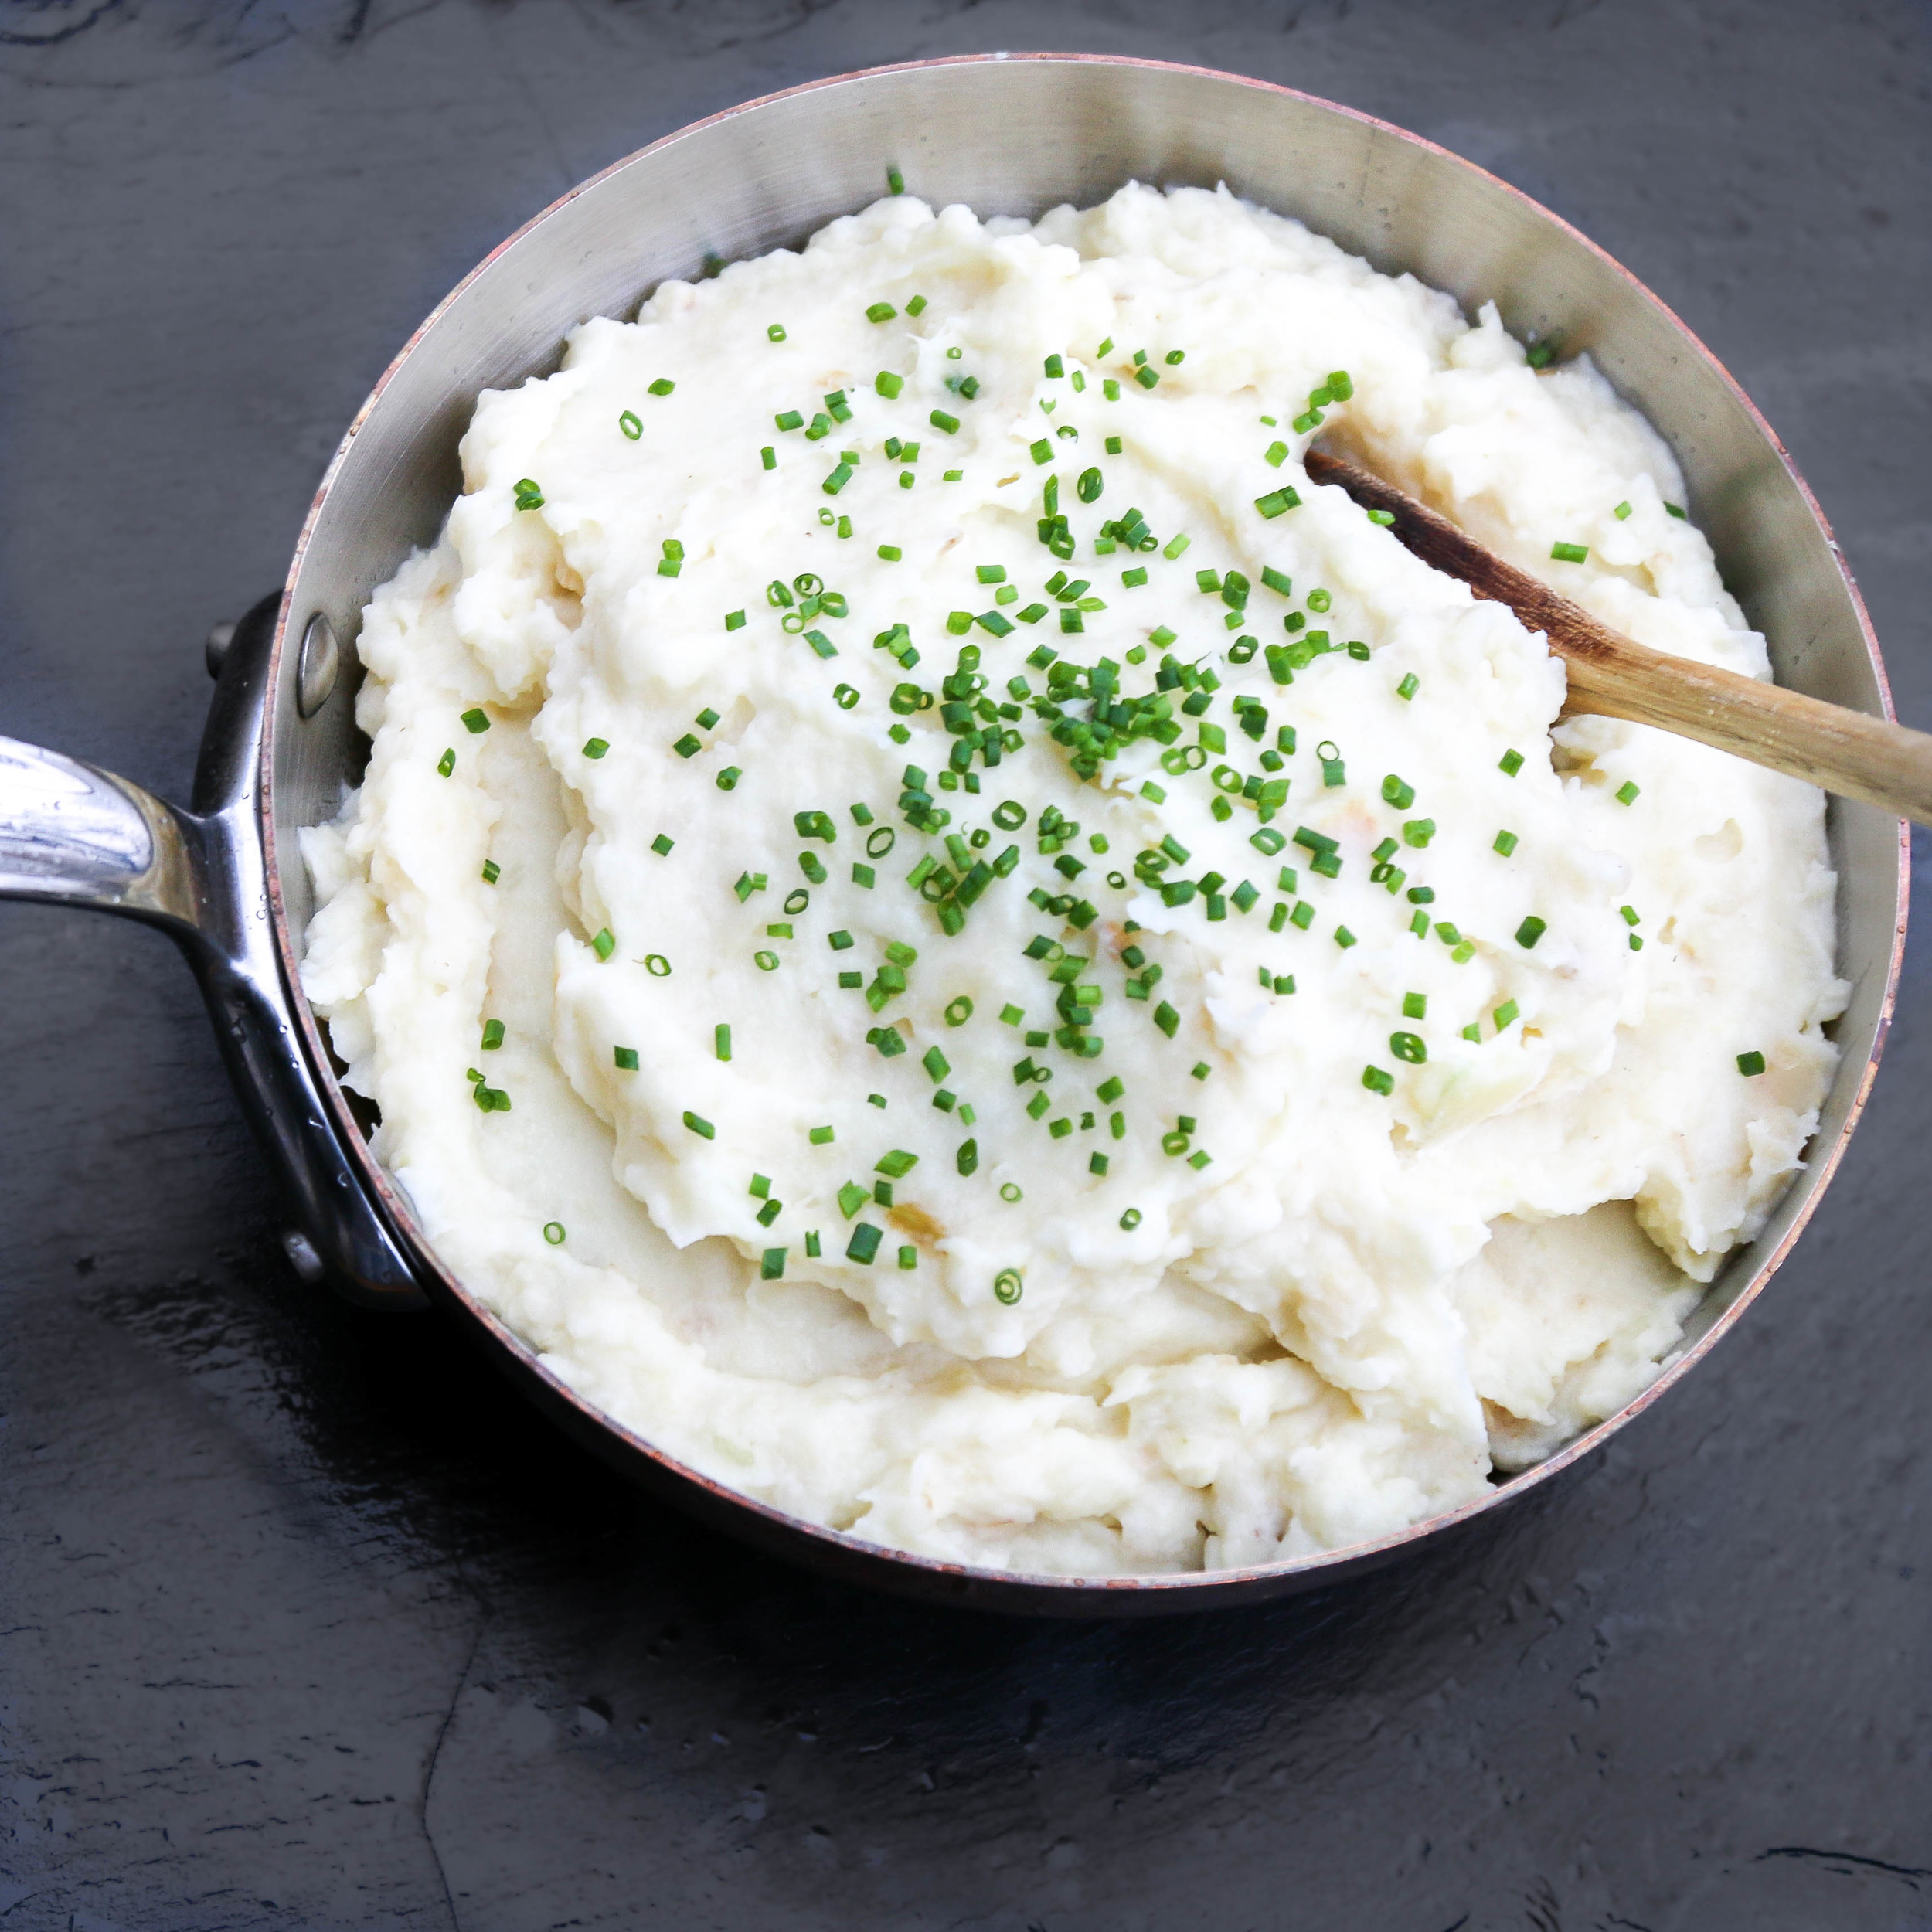 The Hungry Hounds— Buttermilk Celery Root Mashed Potatoes